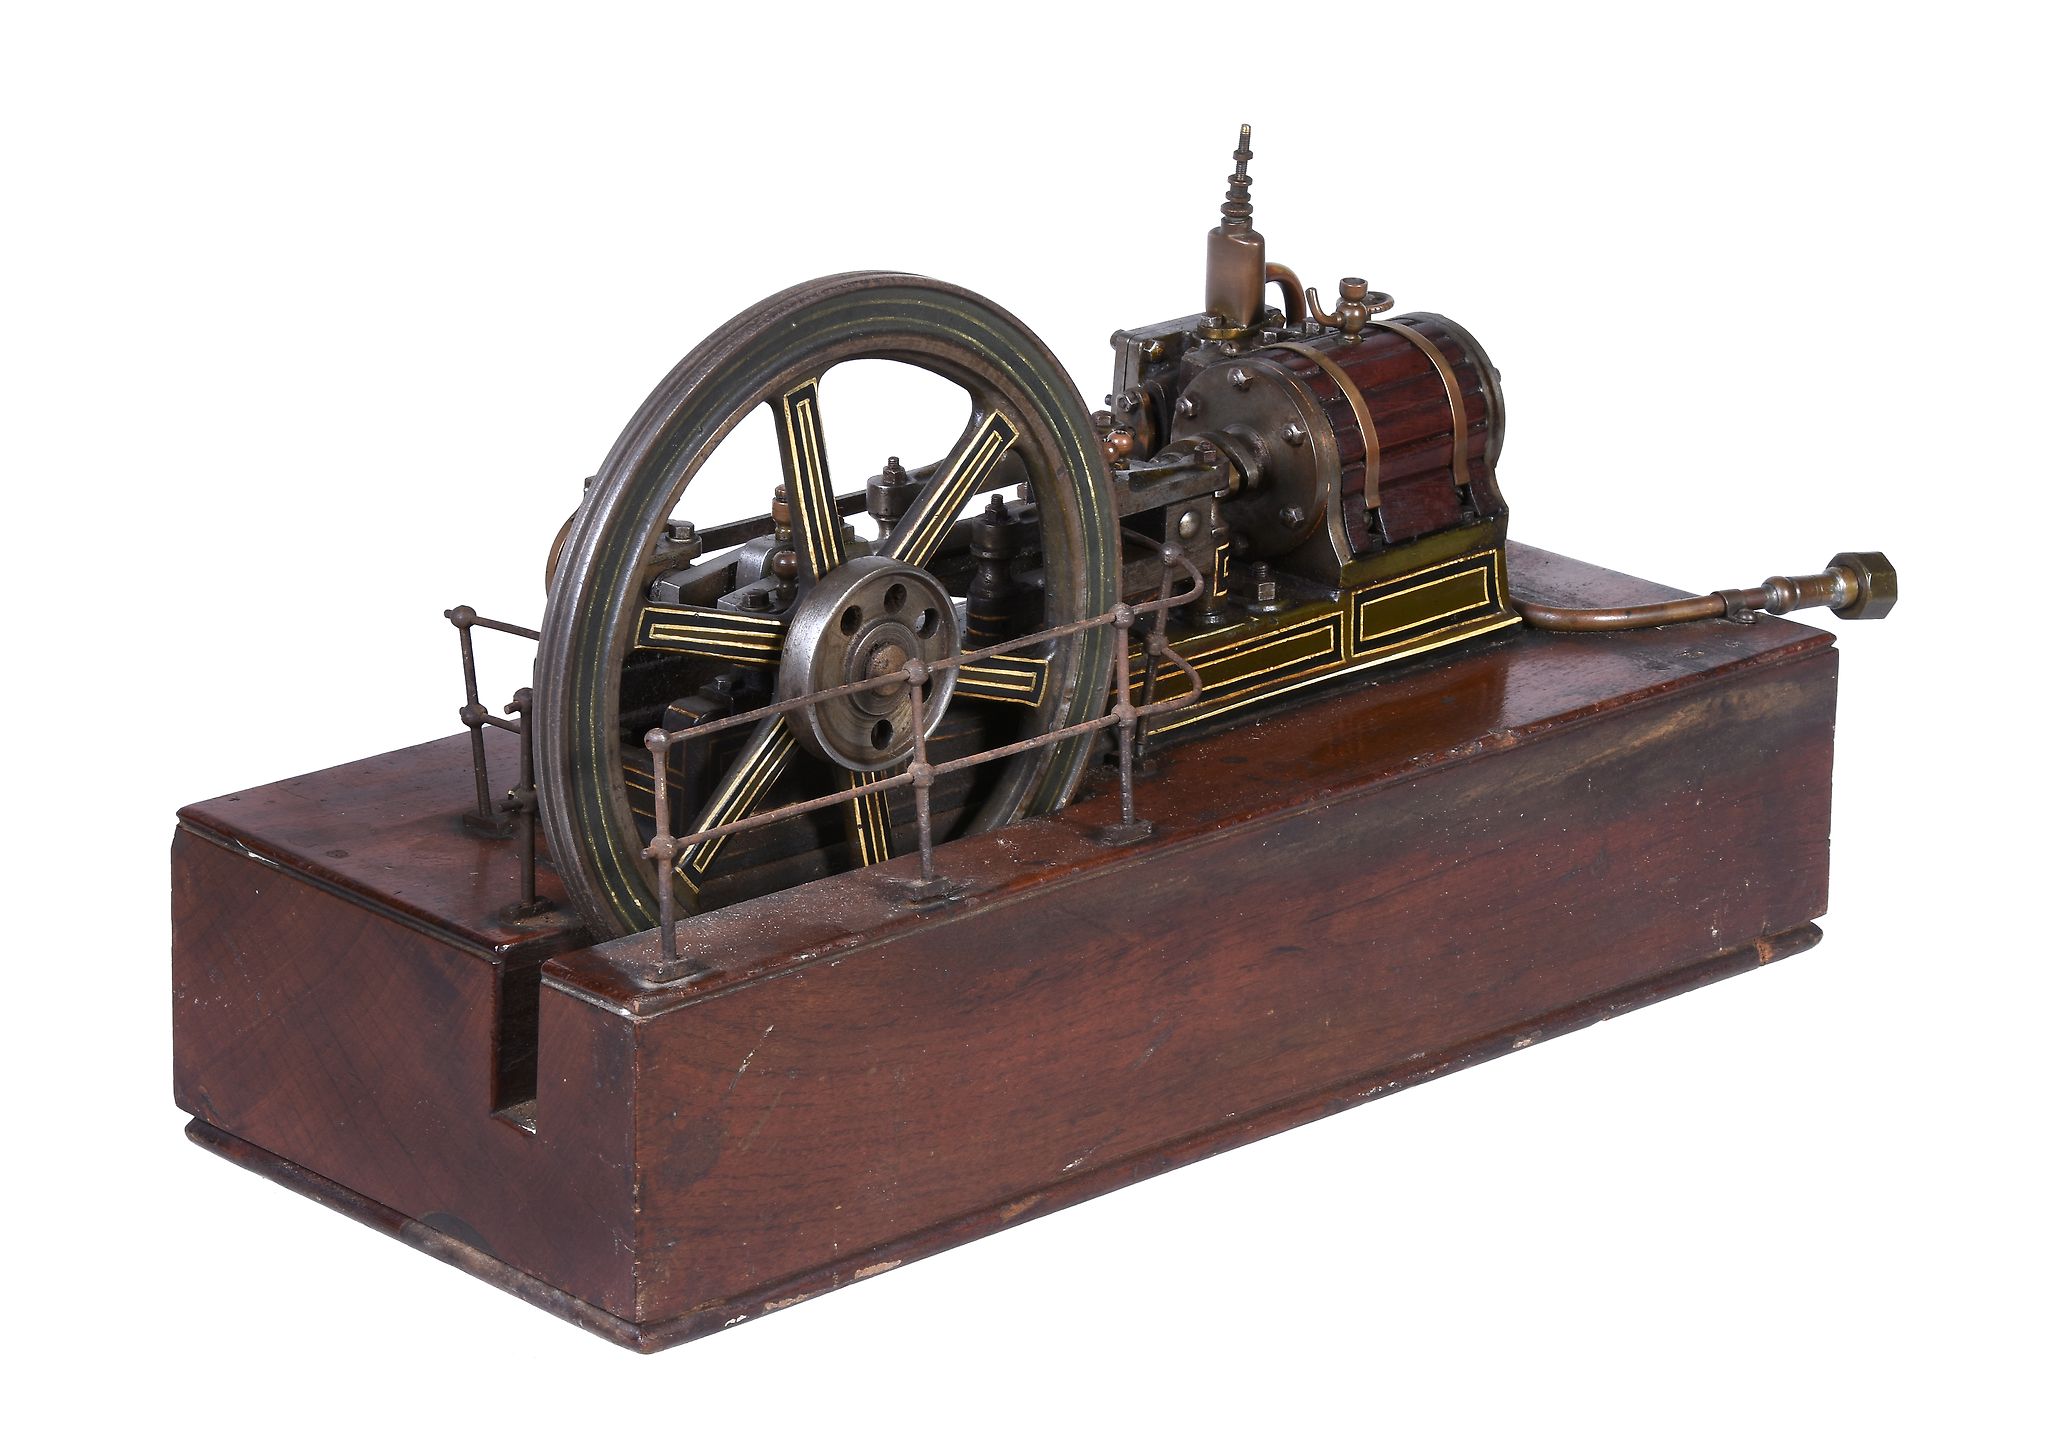 A model of an early 20th century horizontal live steam mill engine, built by Mr J W Mac Donnell of - Image 2 of 3